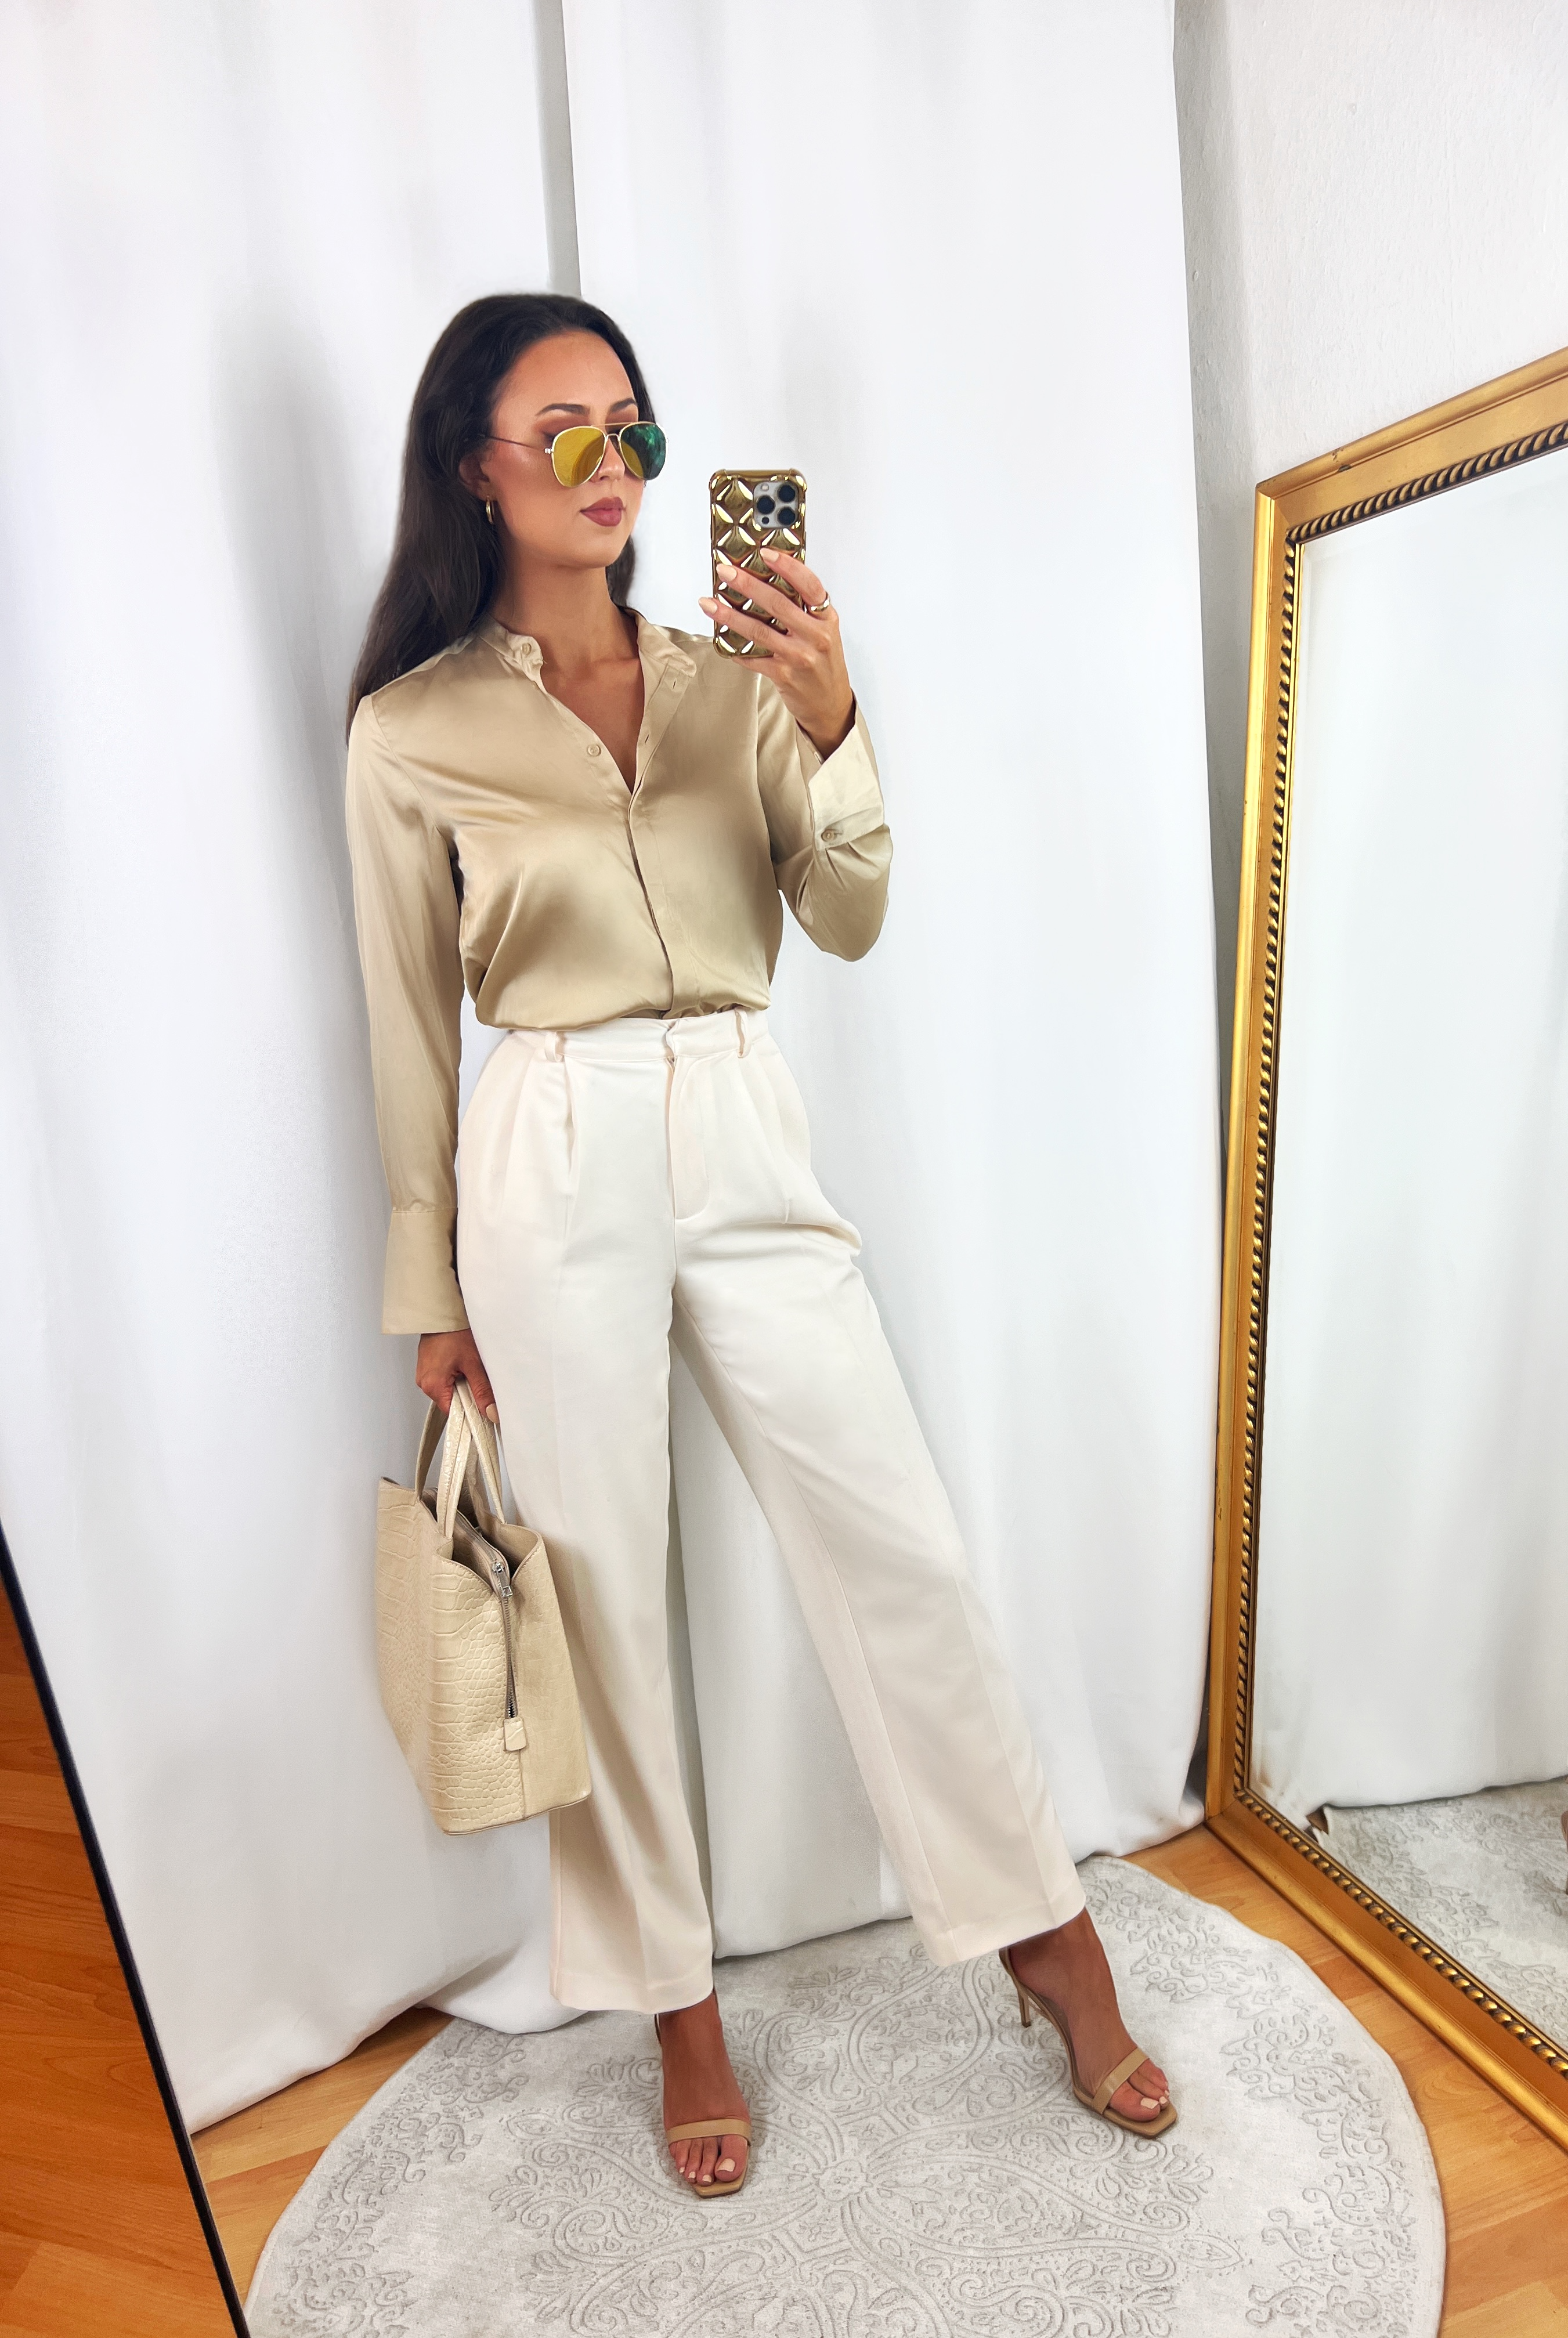 Champagne Beige Blouse Outfit with Cream Pants